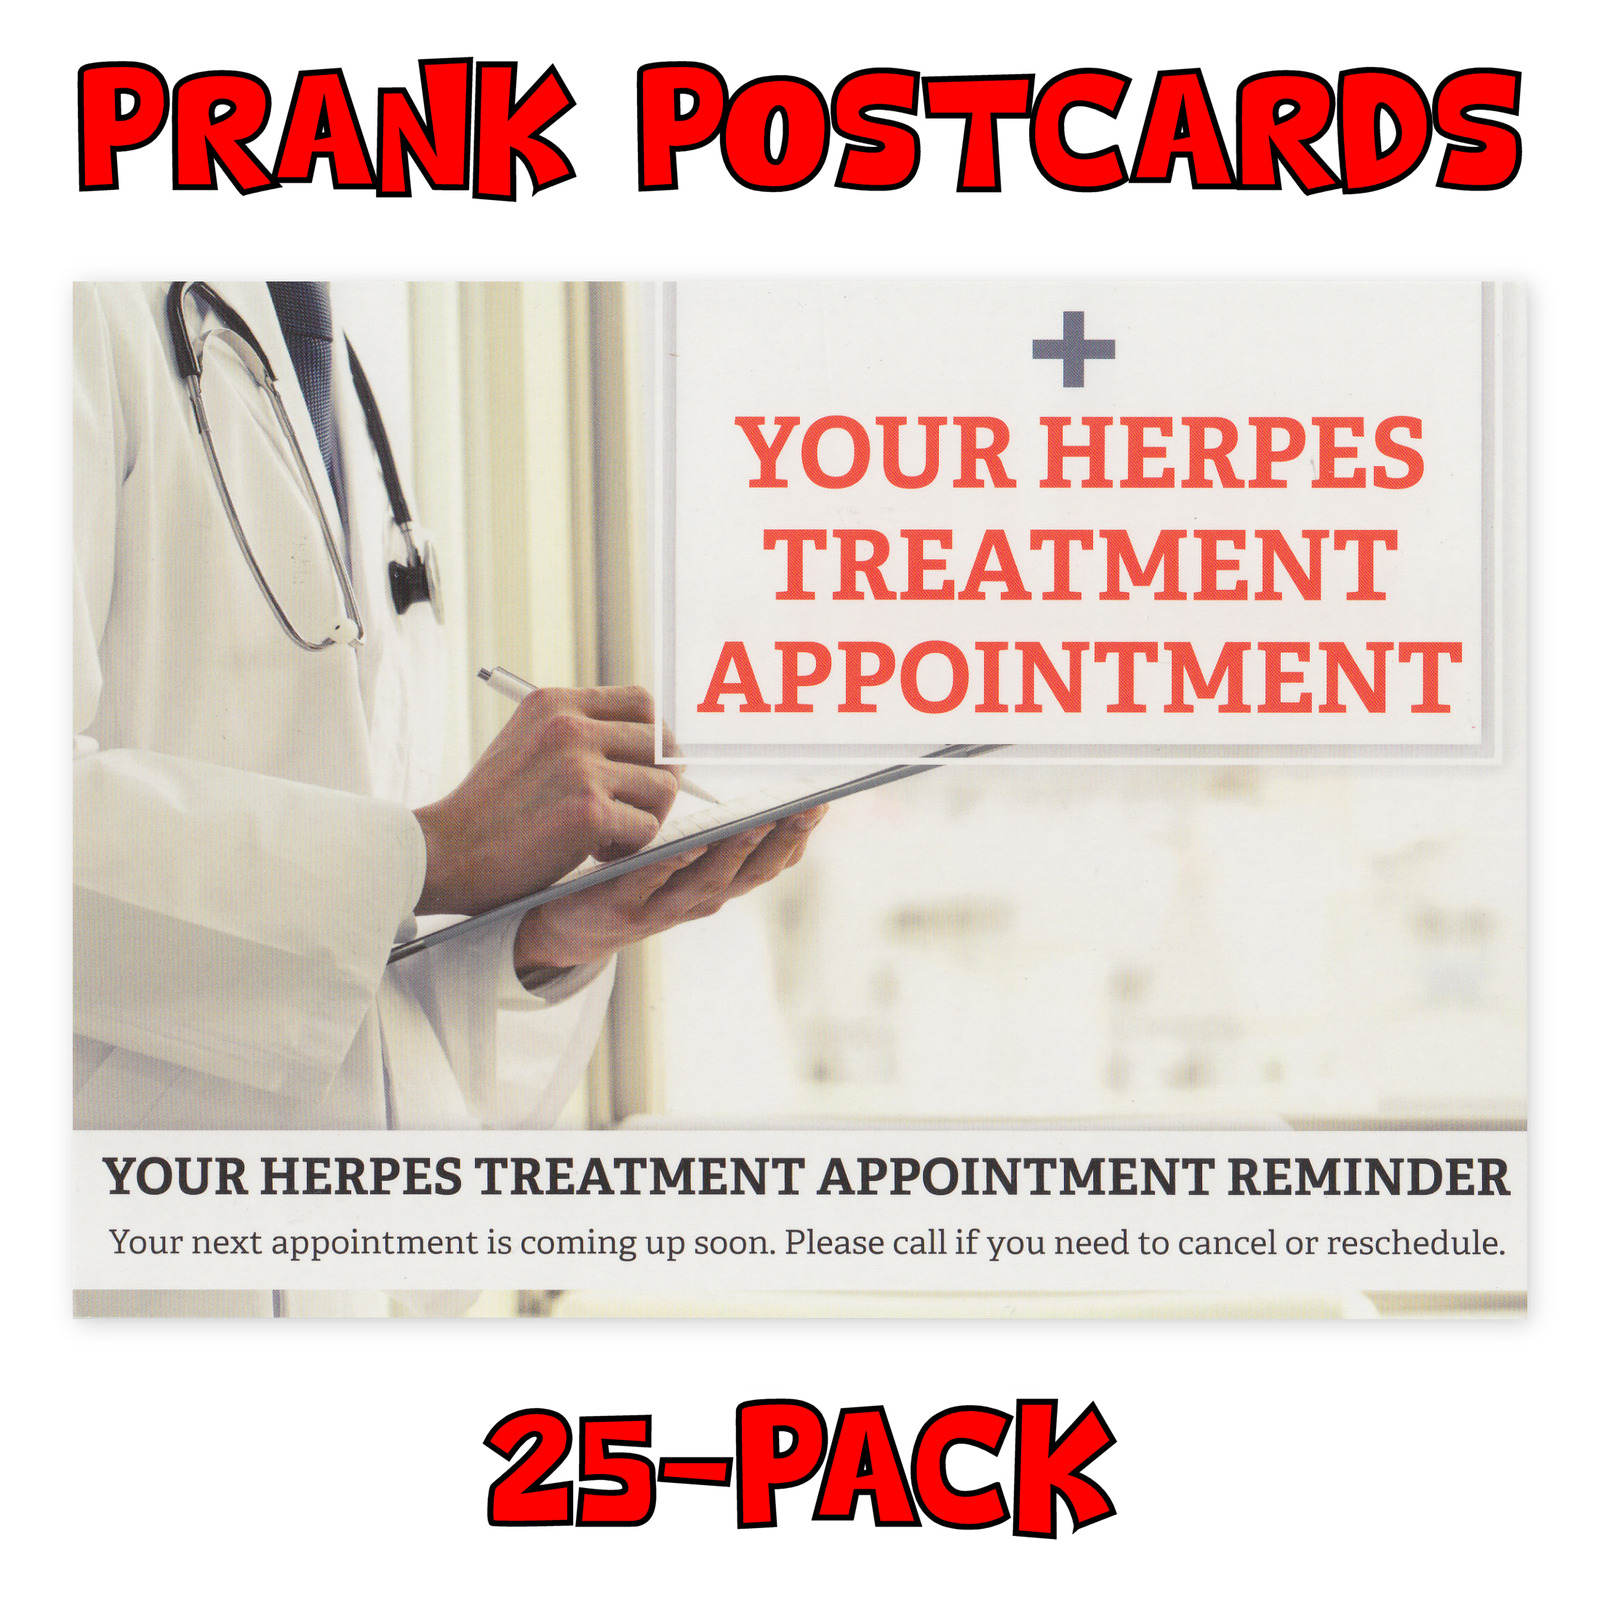 (25-Pack) Prank Postcards - Herpes Treatment - Send Them To Victims Yourself